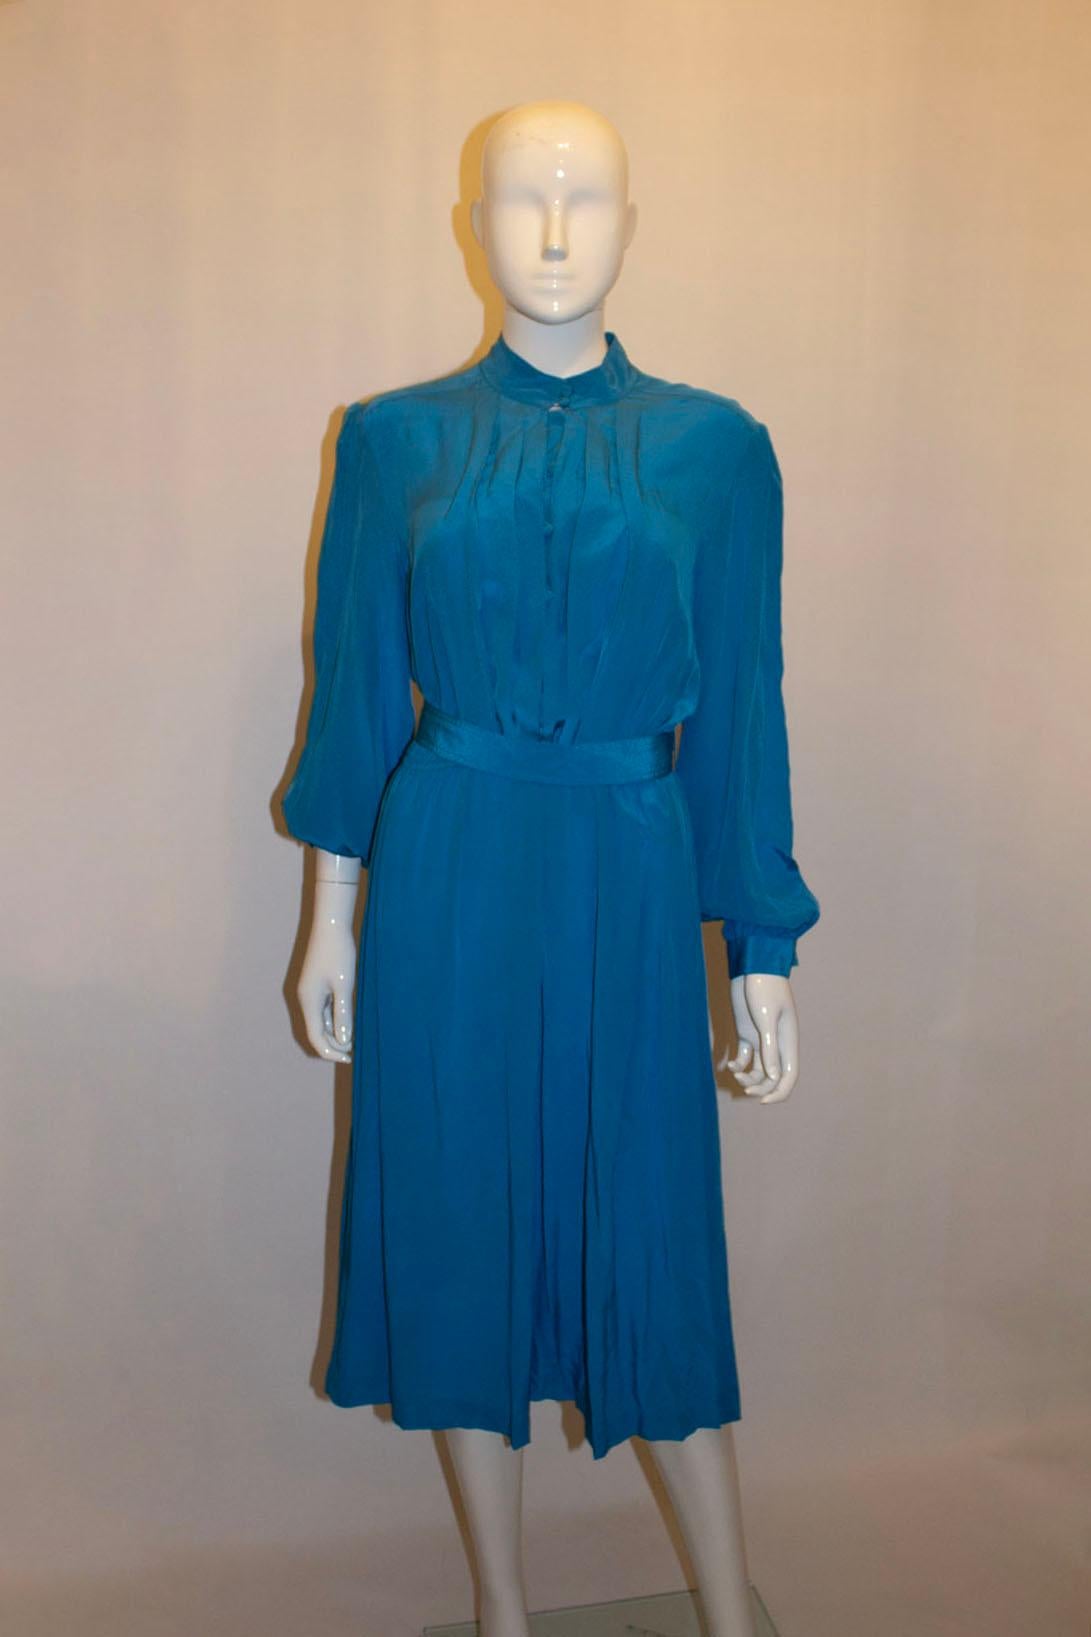 A vintage Laura Philips silk dress. In a pretty turquoise colour, the dress has a stand up collar, button front opening, folds/pleats at the front and an elasticated waist. It has two buttons cuffs, a self fabric belt and is unlined. Measurements: